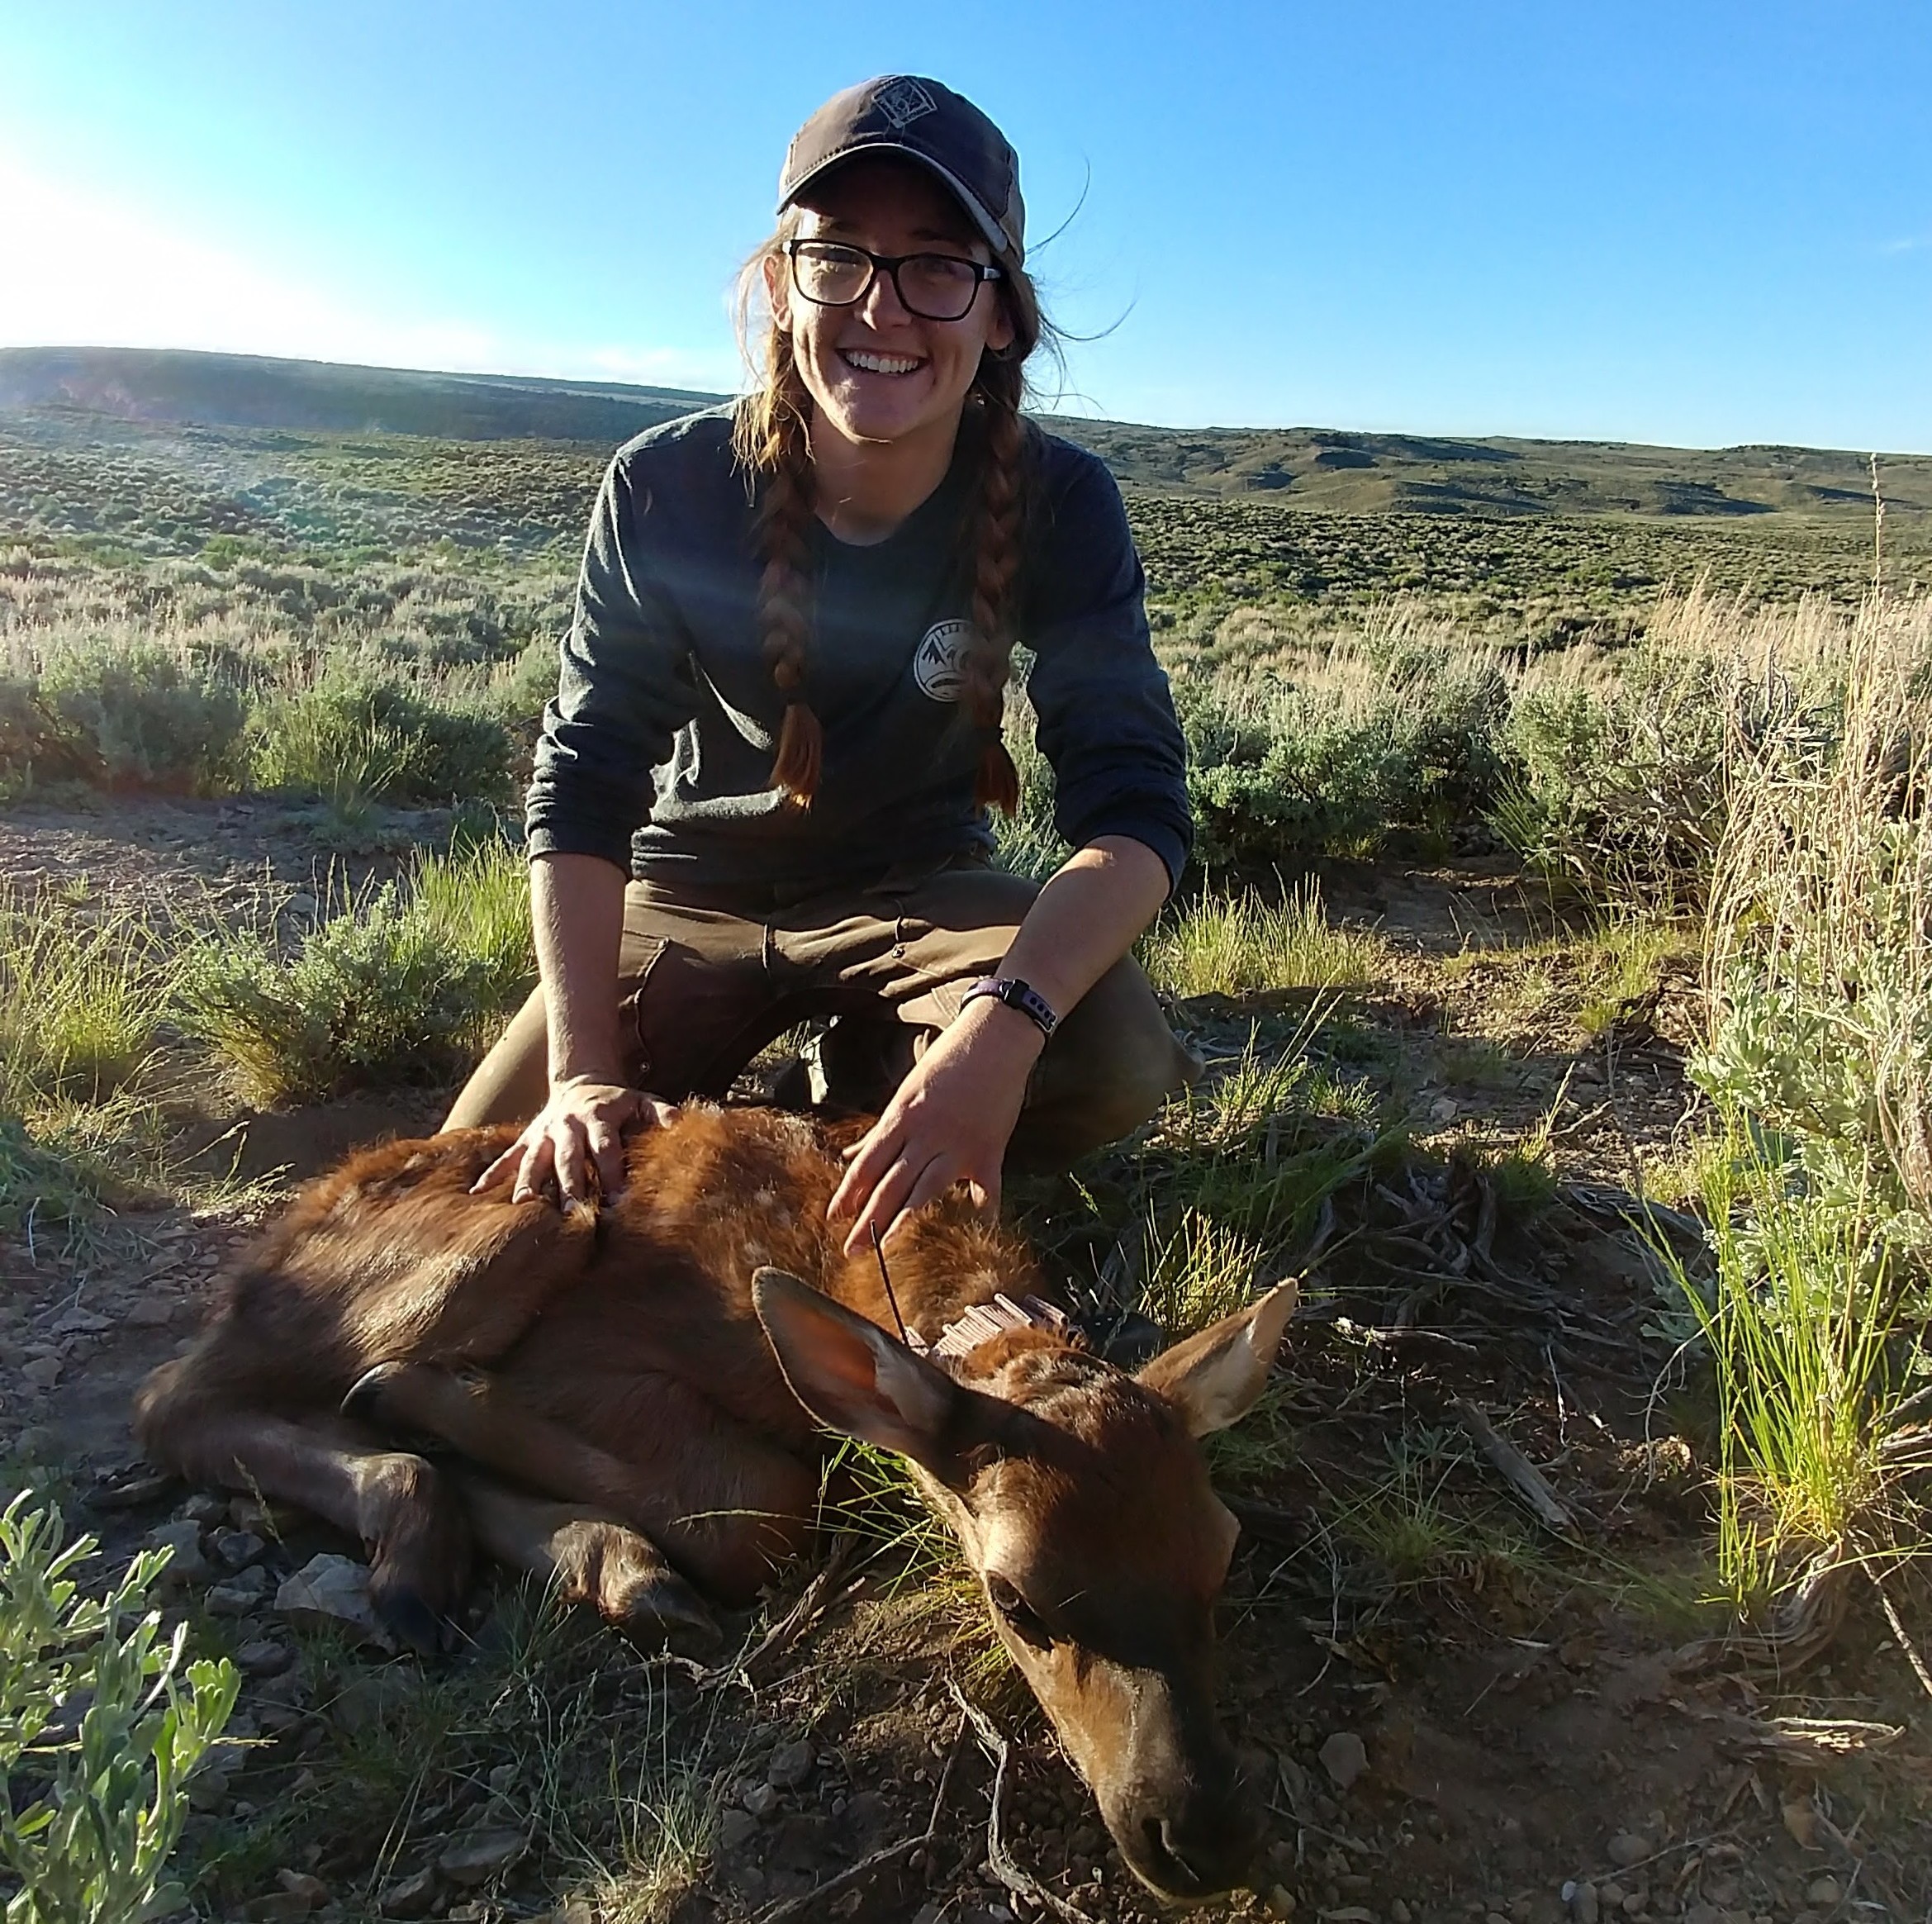 Tayler with an elk calf for the DEER project.